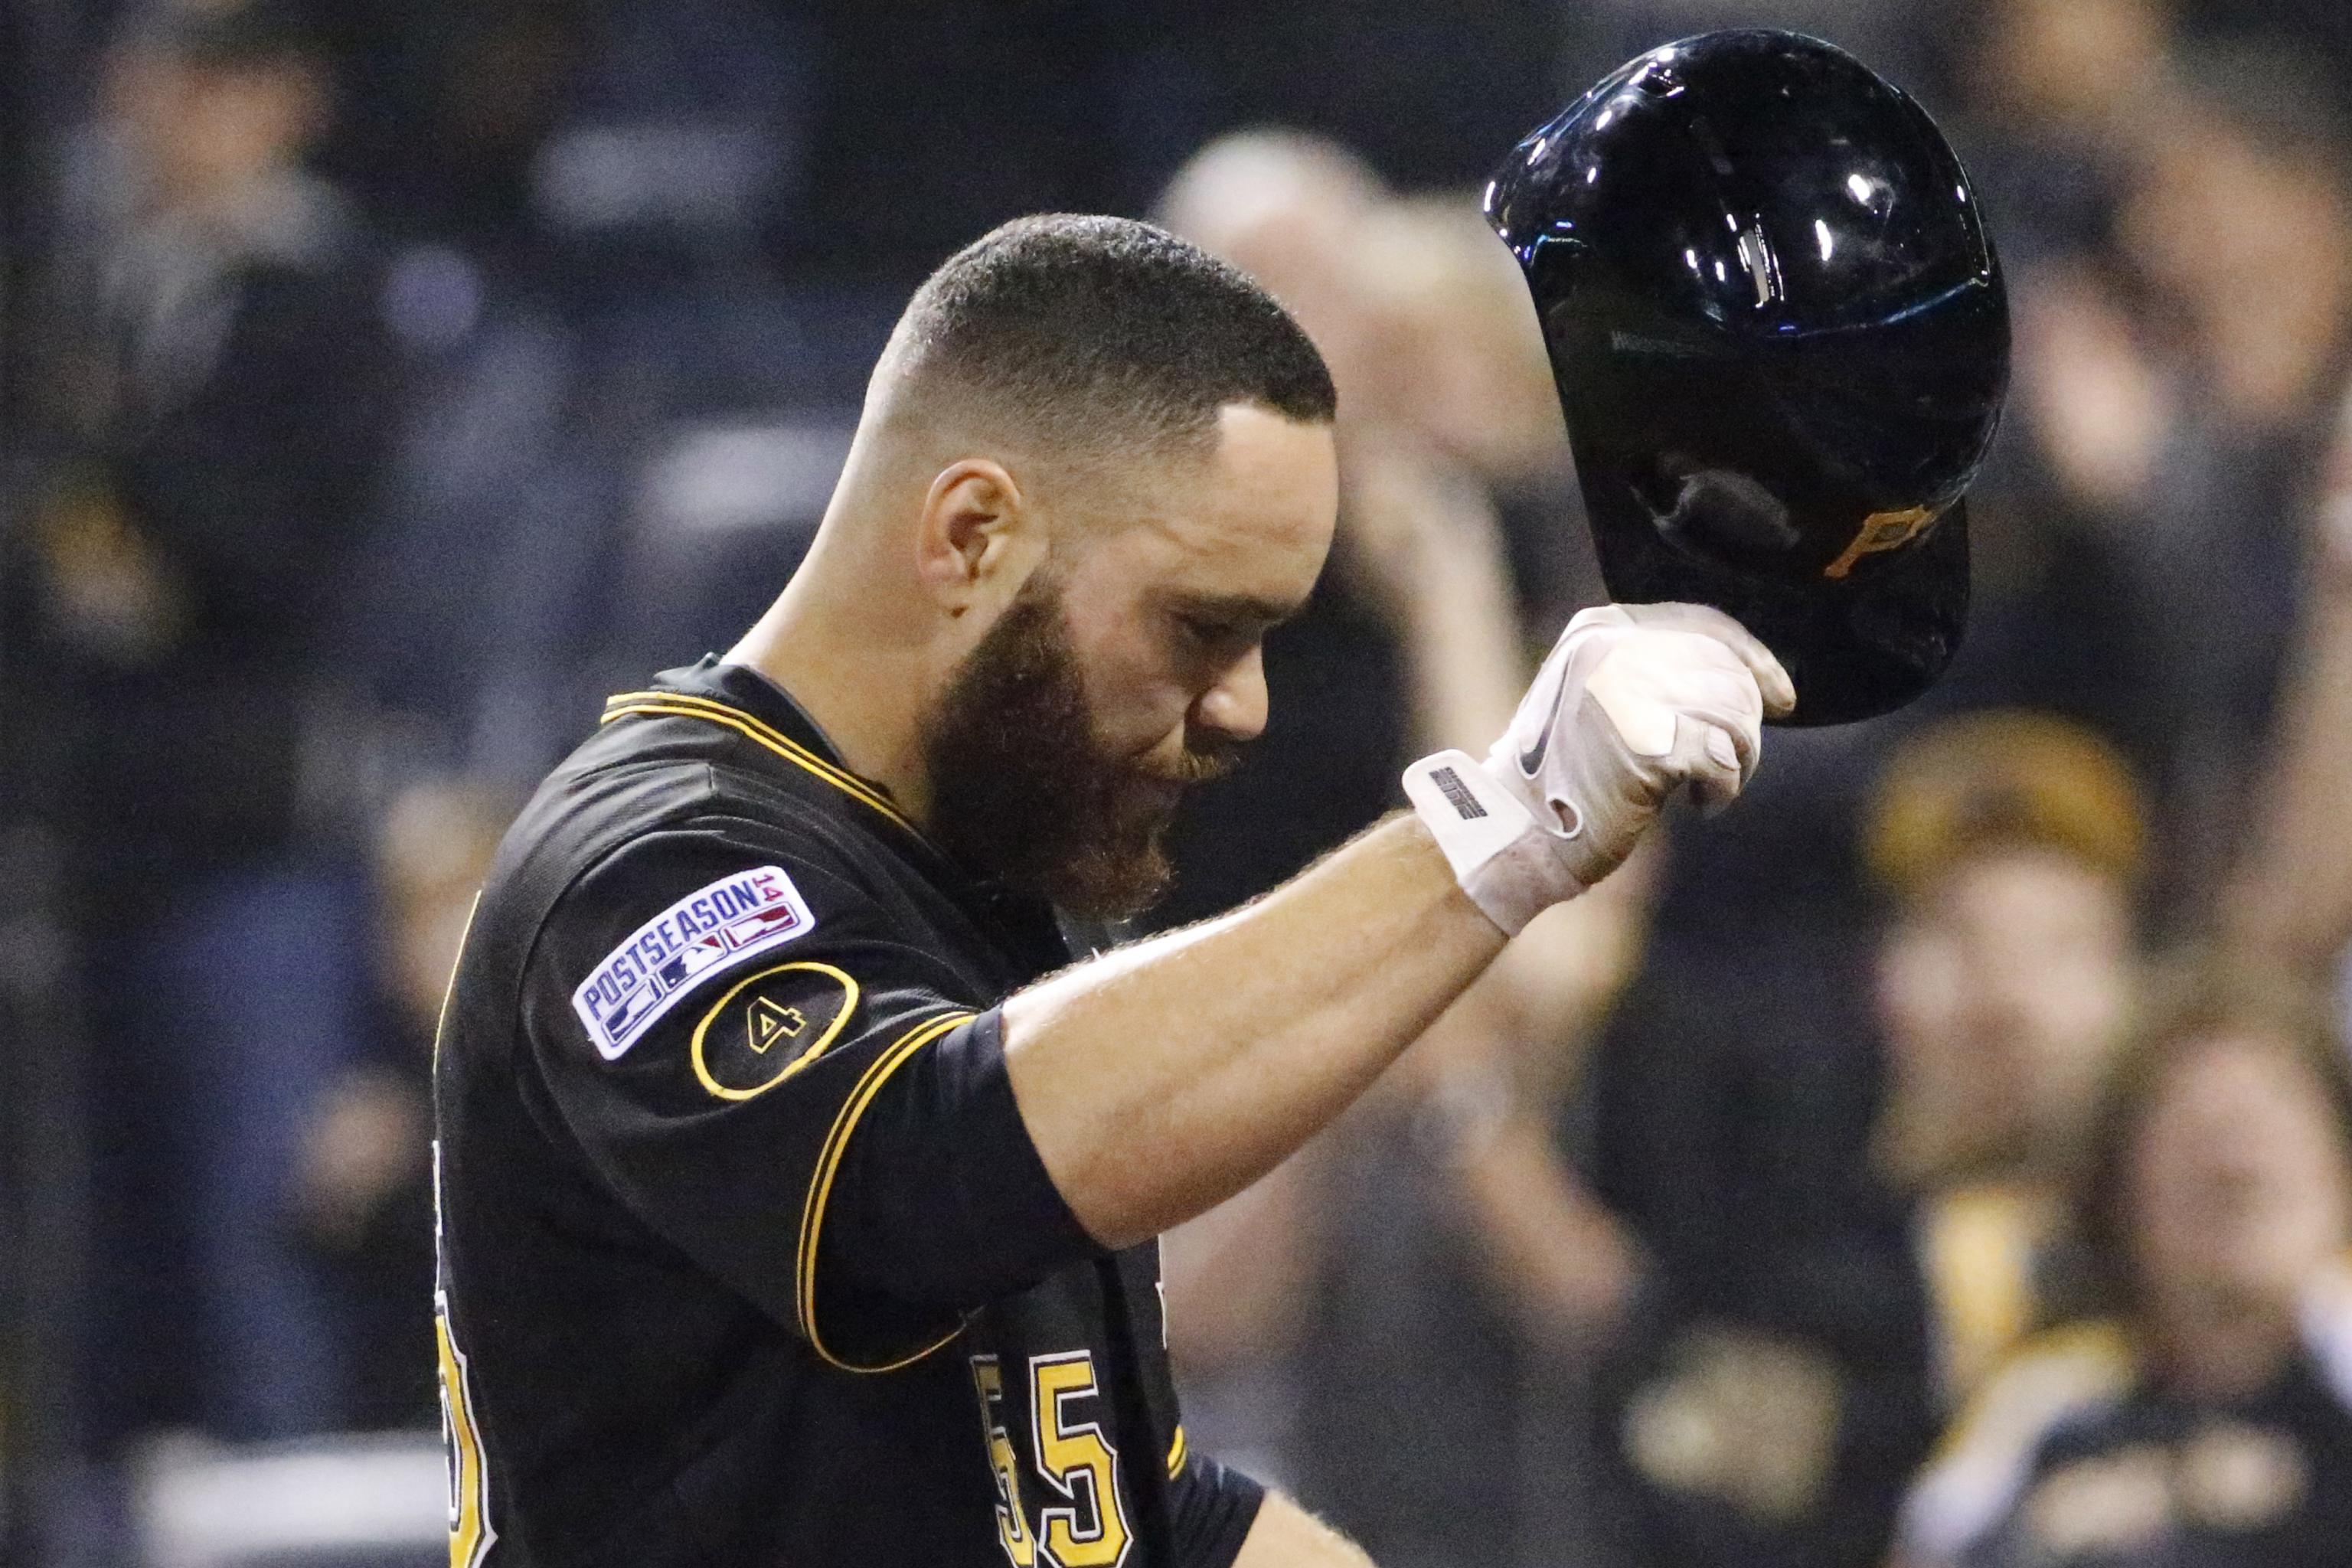 Pirates place catcher Russell Martin on DL with hamstring strain